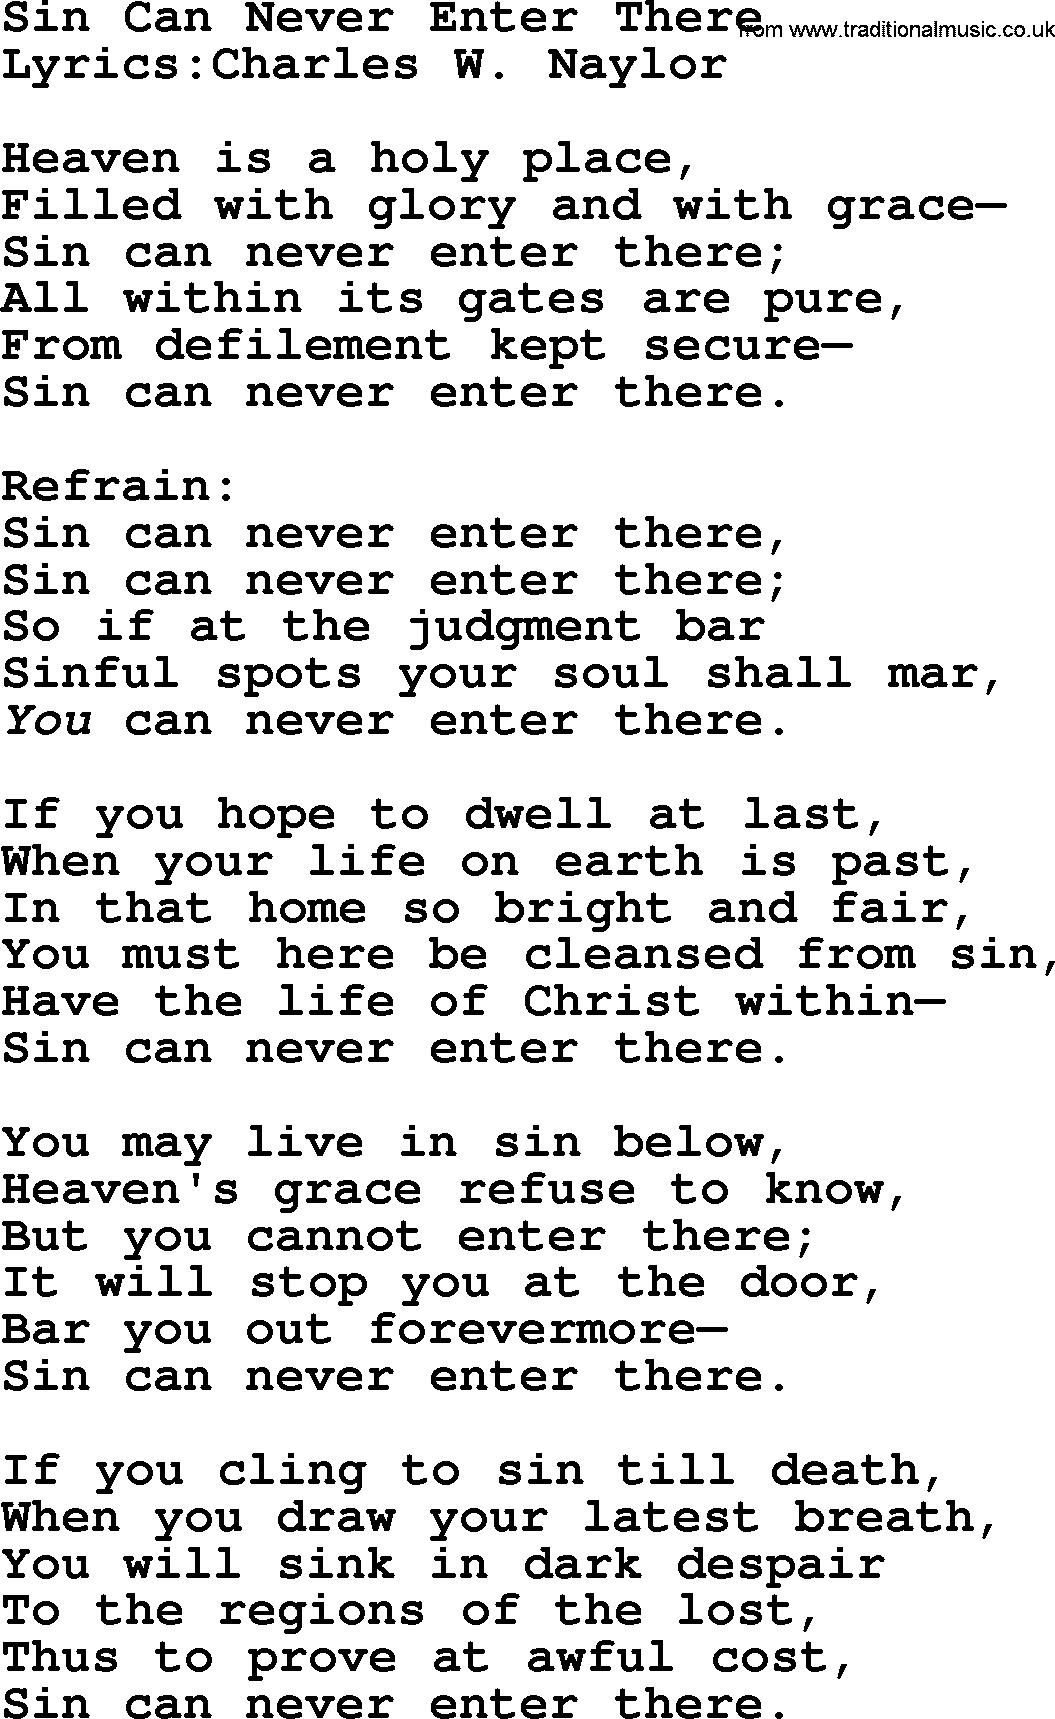 Songs and Hymns about Heaven: Sin Can Never Enter There lyrics with PDF